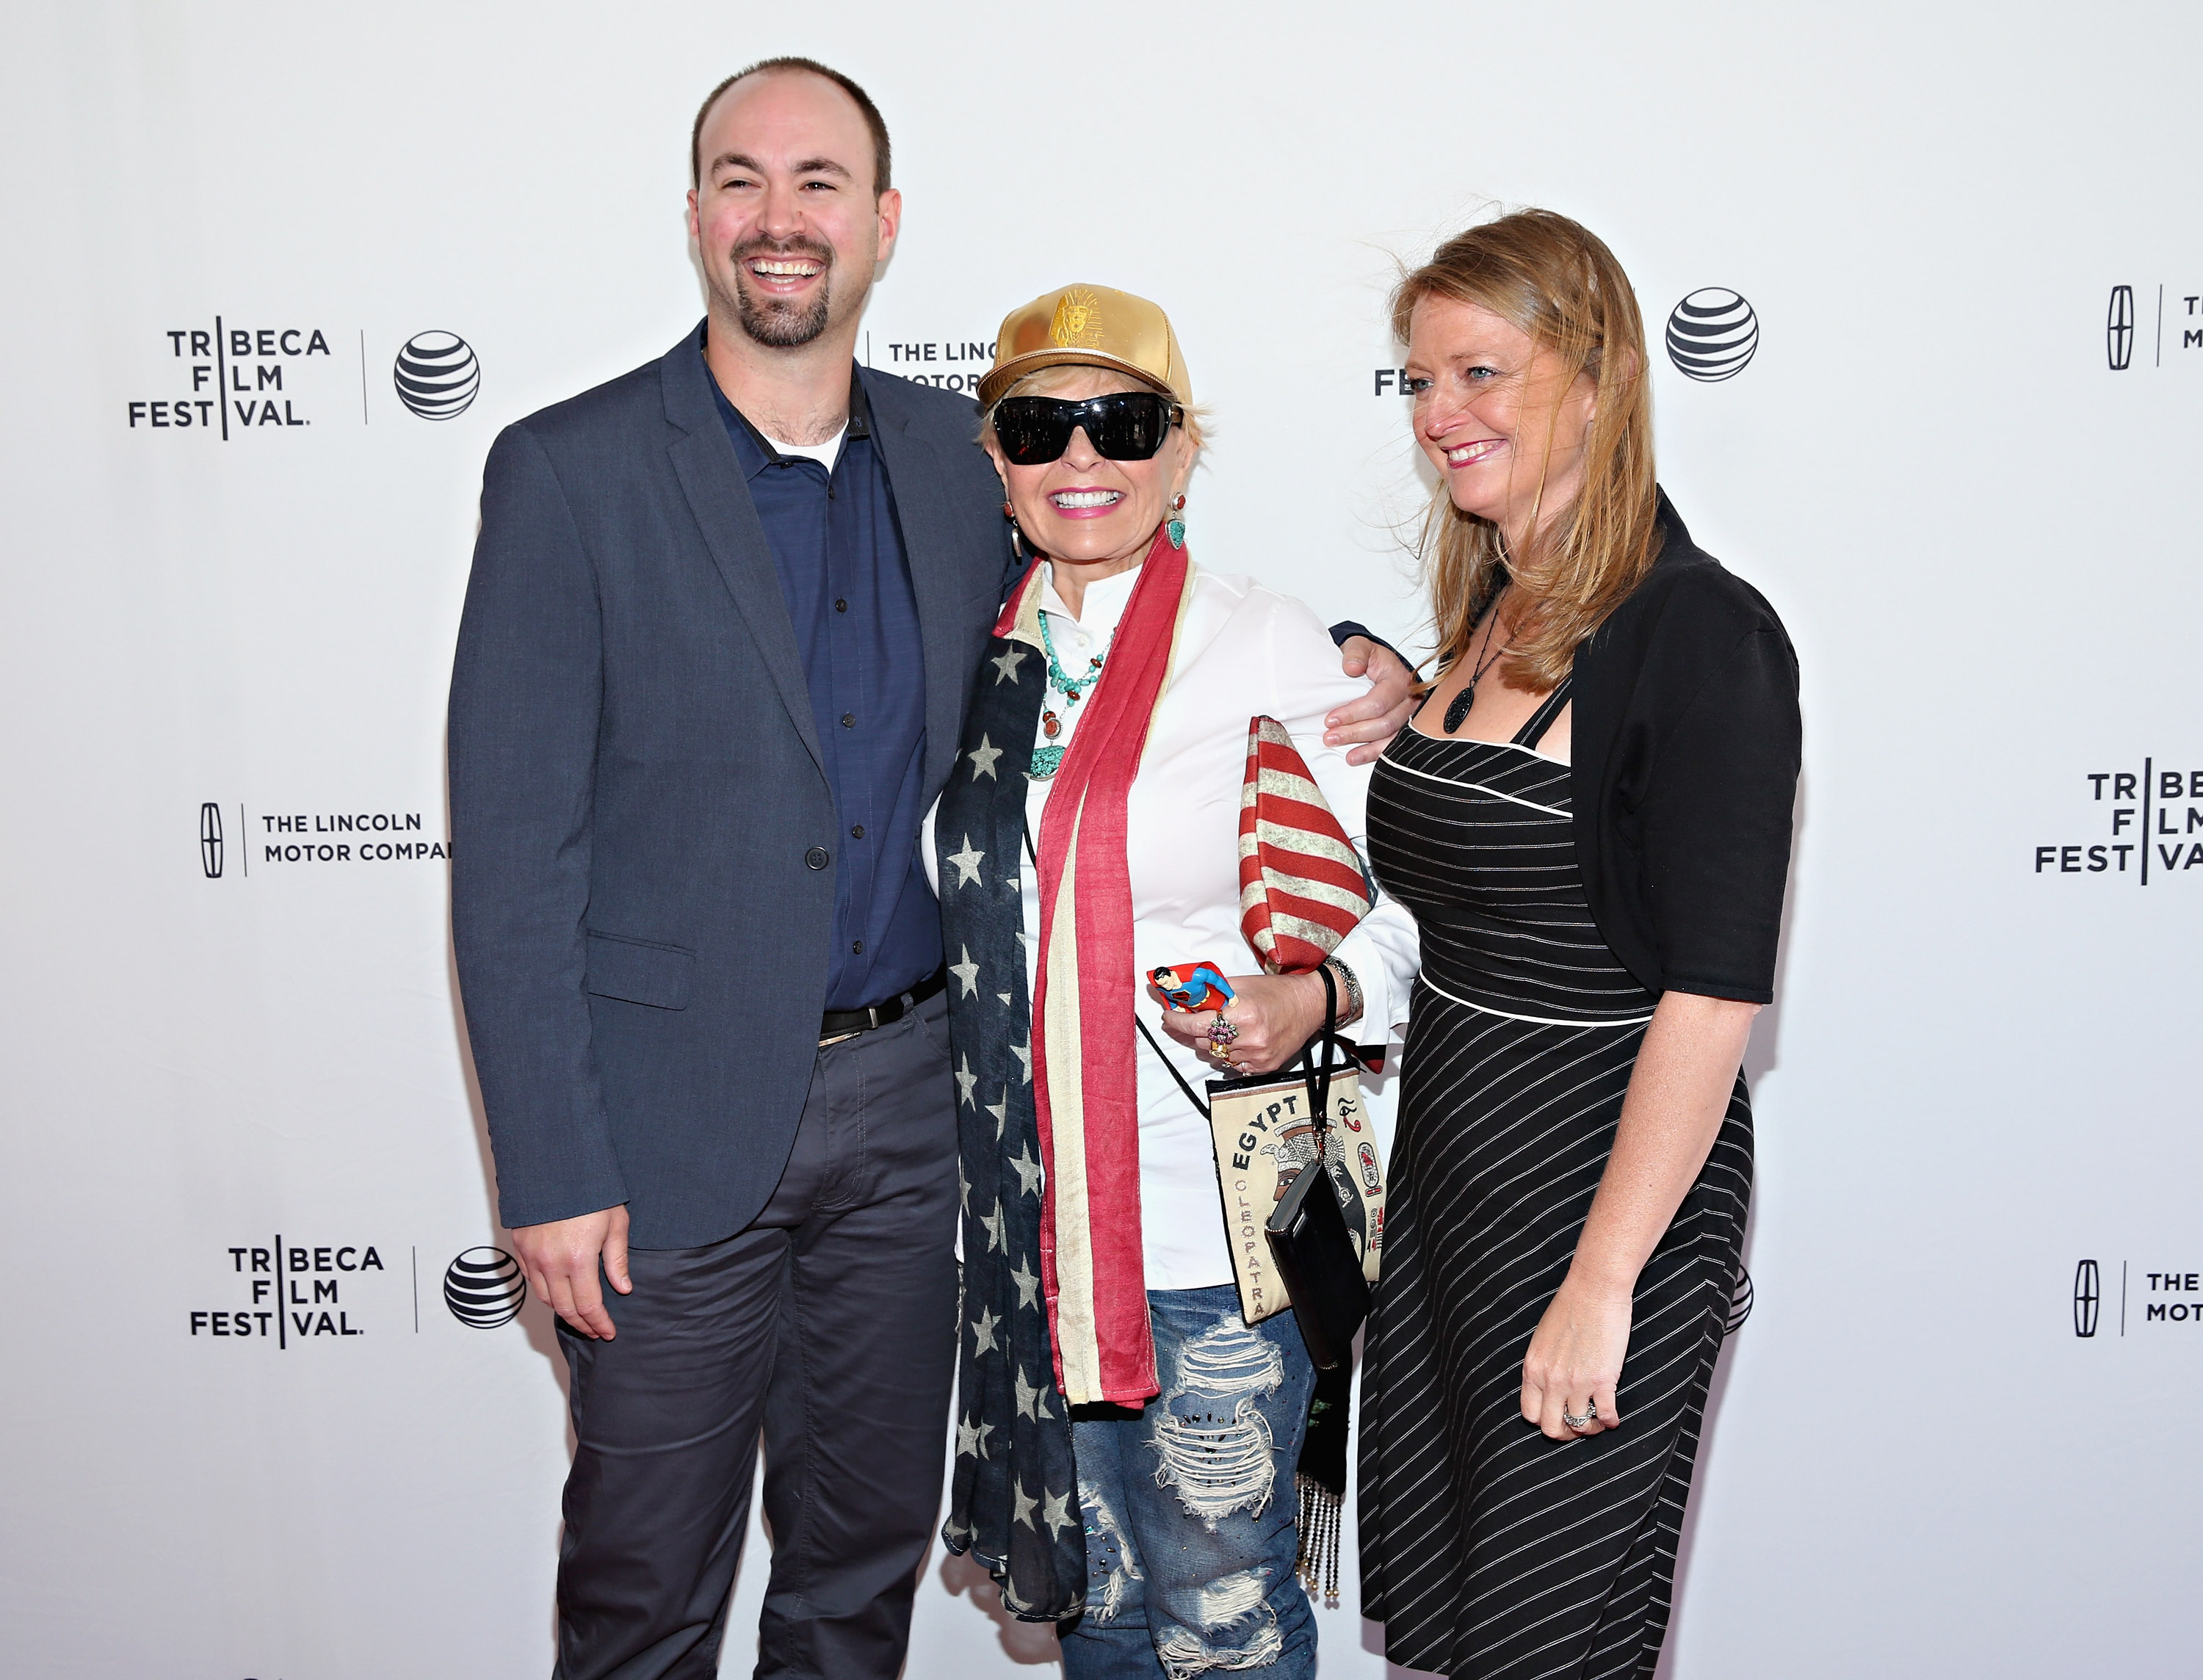 Roseanne Barr, Jake Pentland, and Brandi Brown attend the World Premiere Documentary: "Roseanne For President!" during the 2015 Tribeca Film Festival at SVA Theatre 1 on April 18, 2015, in New York City. | Source: Getty Images